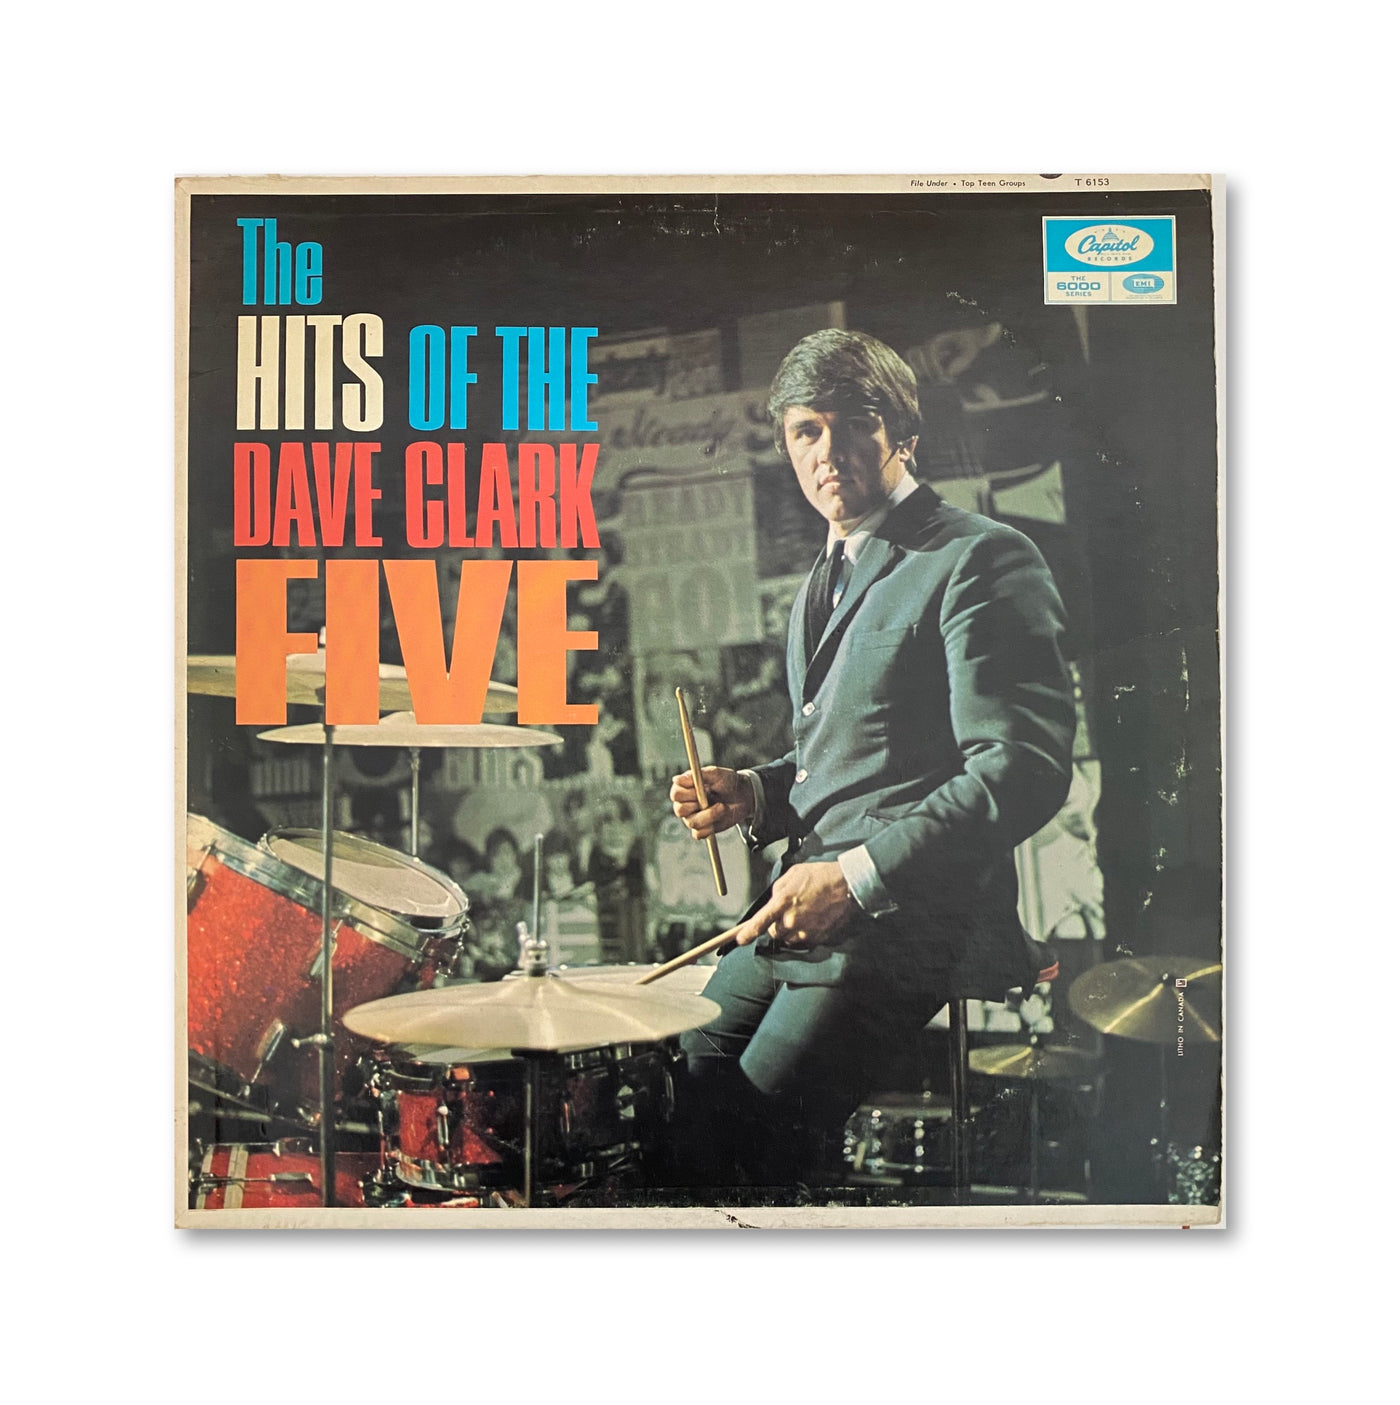 The Dave Clark Five - Hits Of The Dave Clark Five